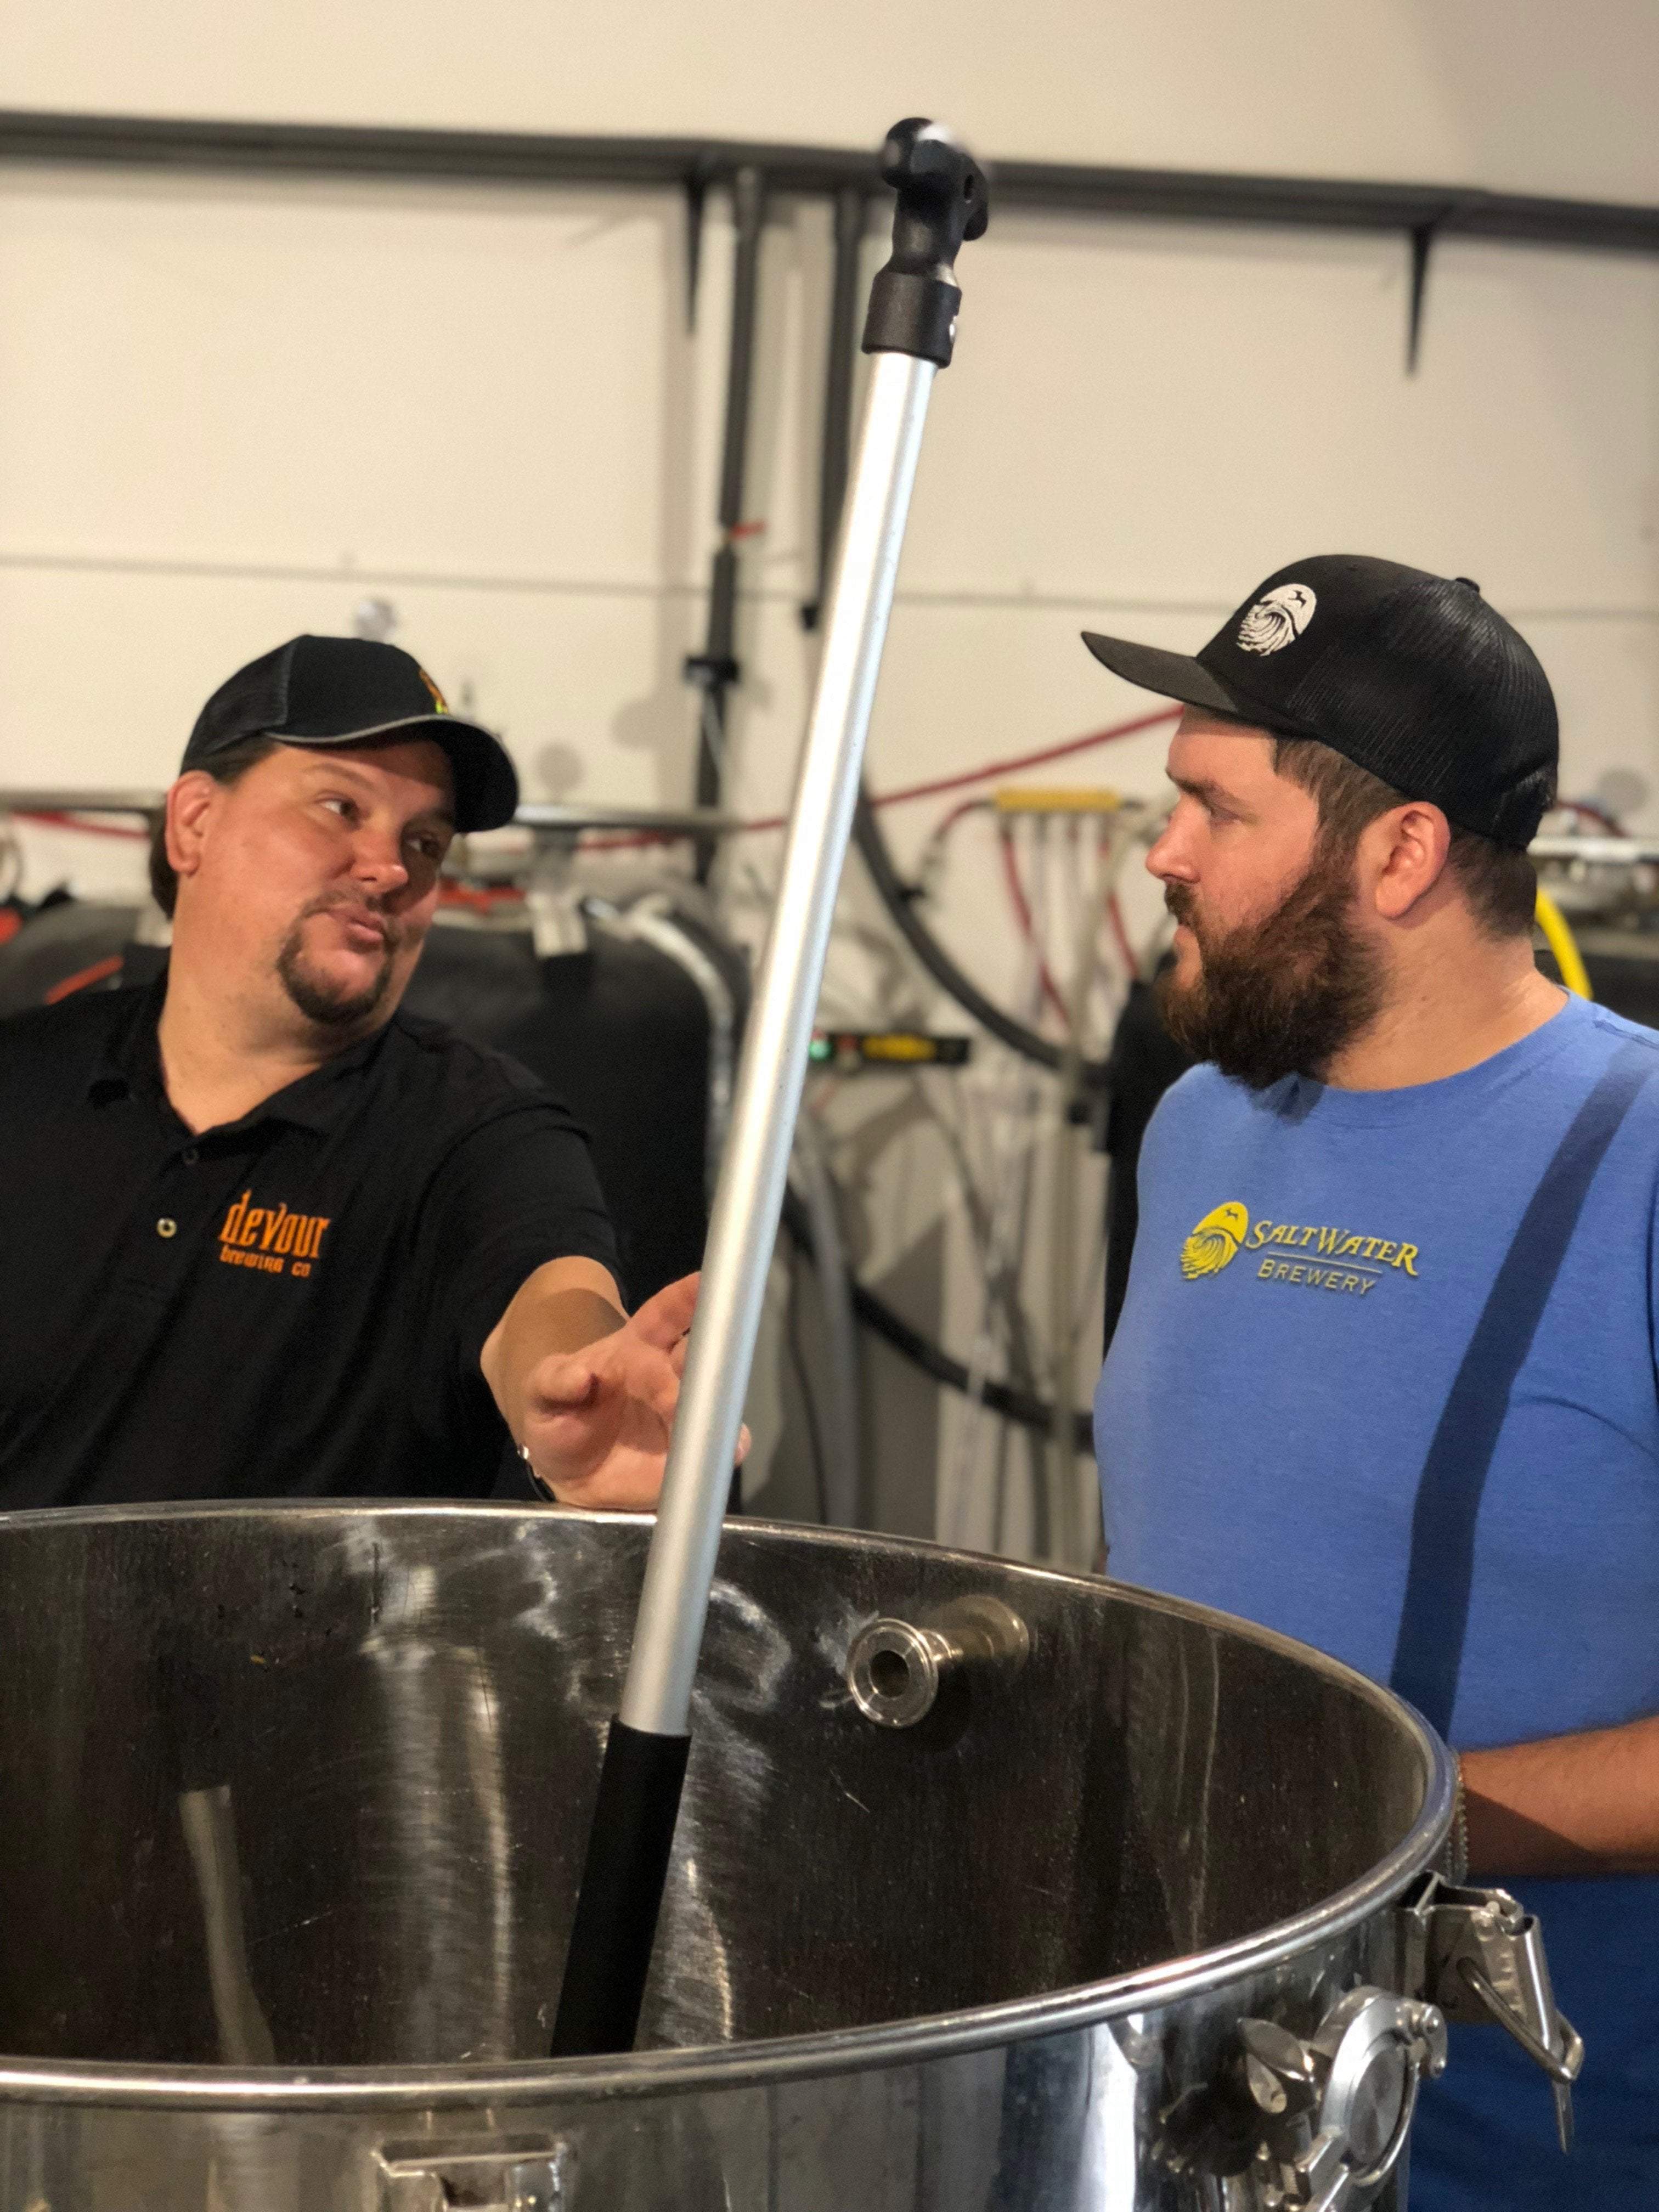 What's Brewing at Saltwater Brewery - July 12th